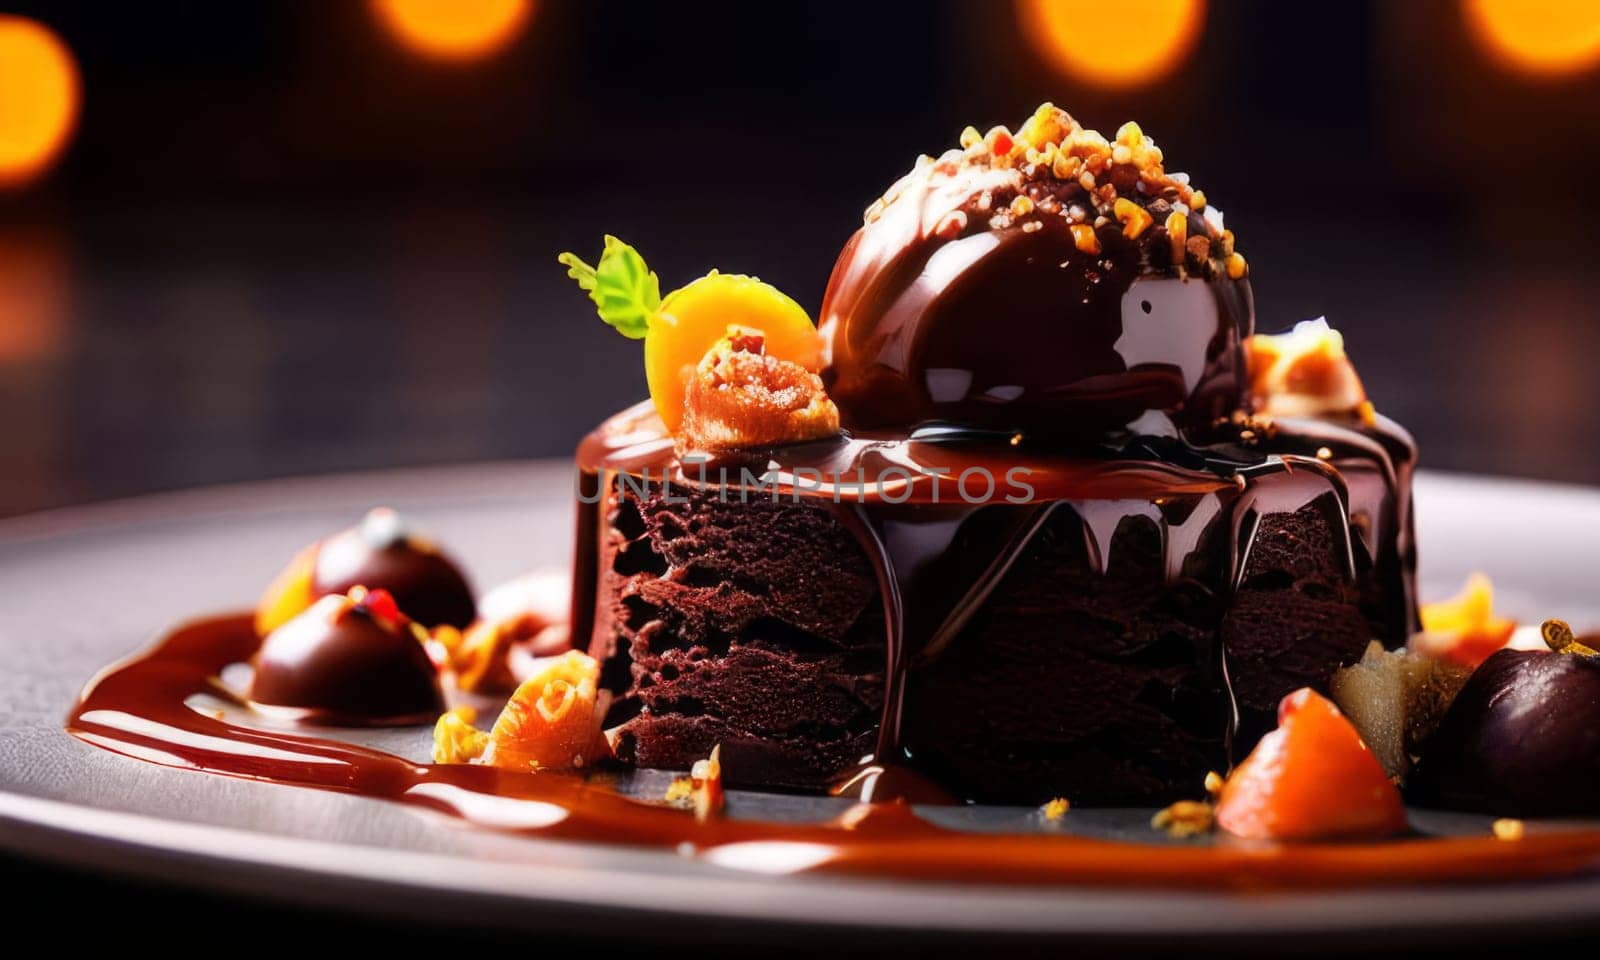 Decadent piece of chocolate cake oozing with rich, velvety chocolate sauce, tempting you with its irresistible sweetness. For recipe websites, cookbooks, dessert advertisements, cafe, culinary blog. by Angelsmoon